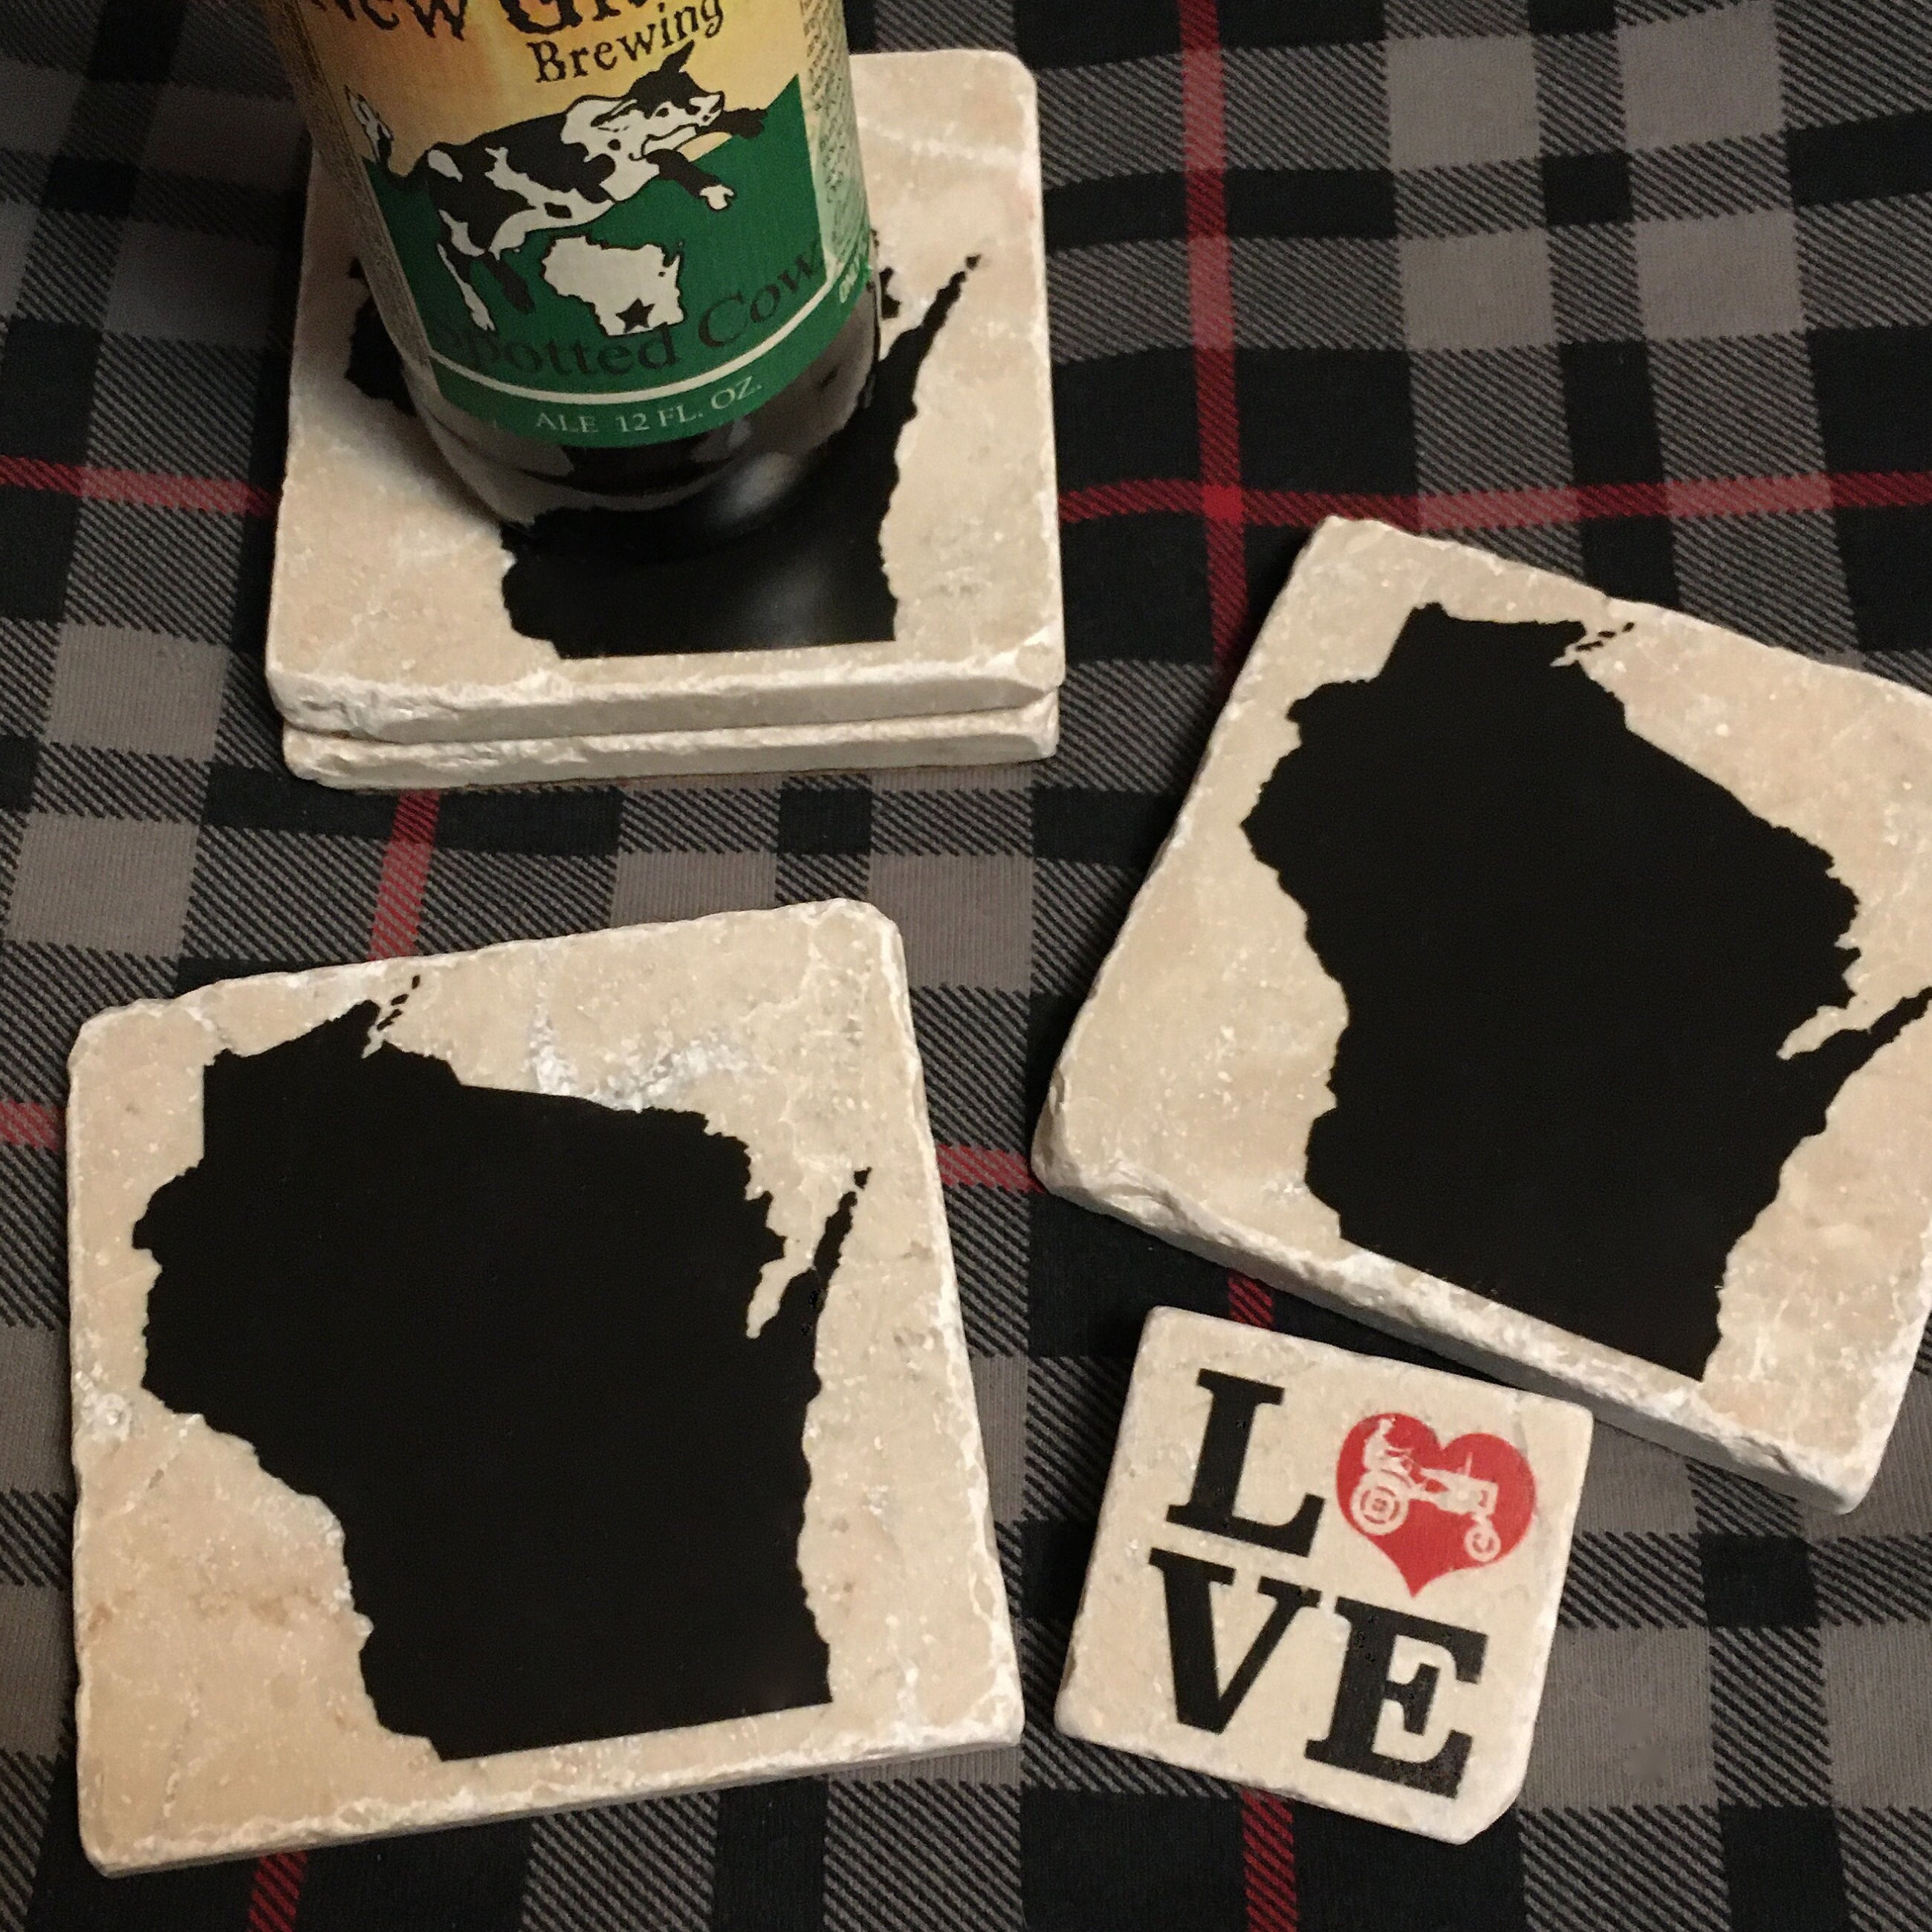 Love Chickens Coasters Farm Coasters Drink Barware Farm Gift Country Decor Housewarming Gift Home Decor Man Cave Marble Stone Tile